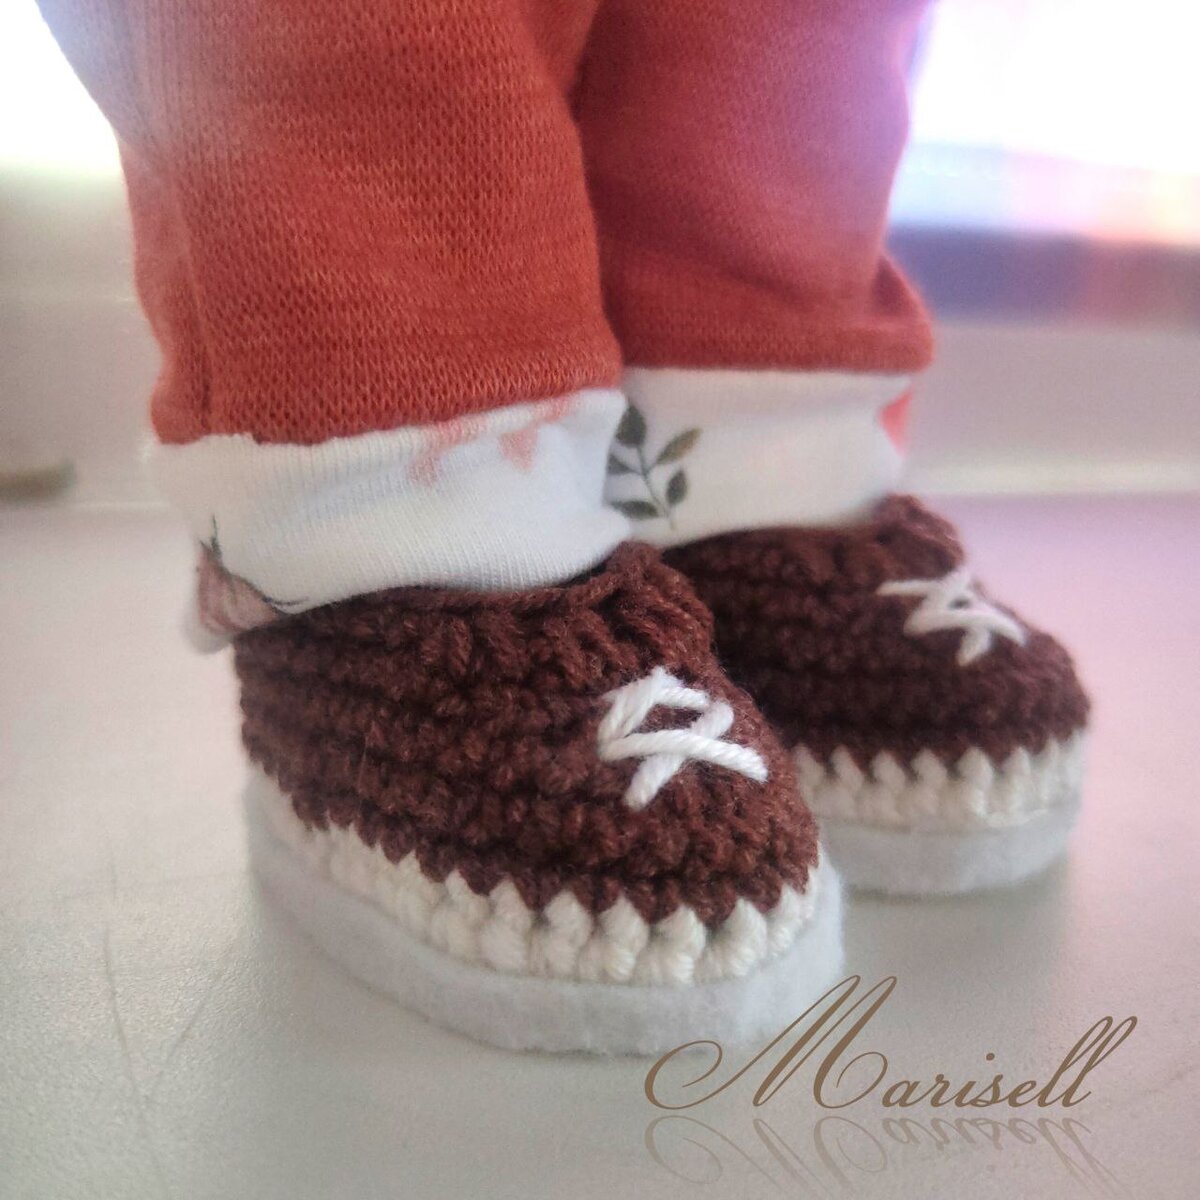 Crochet Adidas Sneakers: Free Pattern and Tutorial